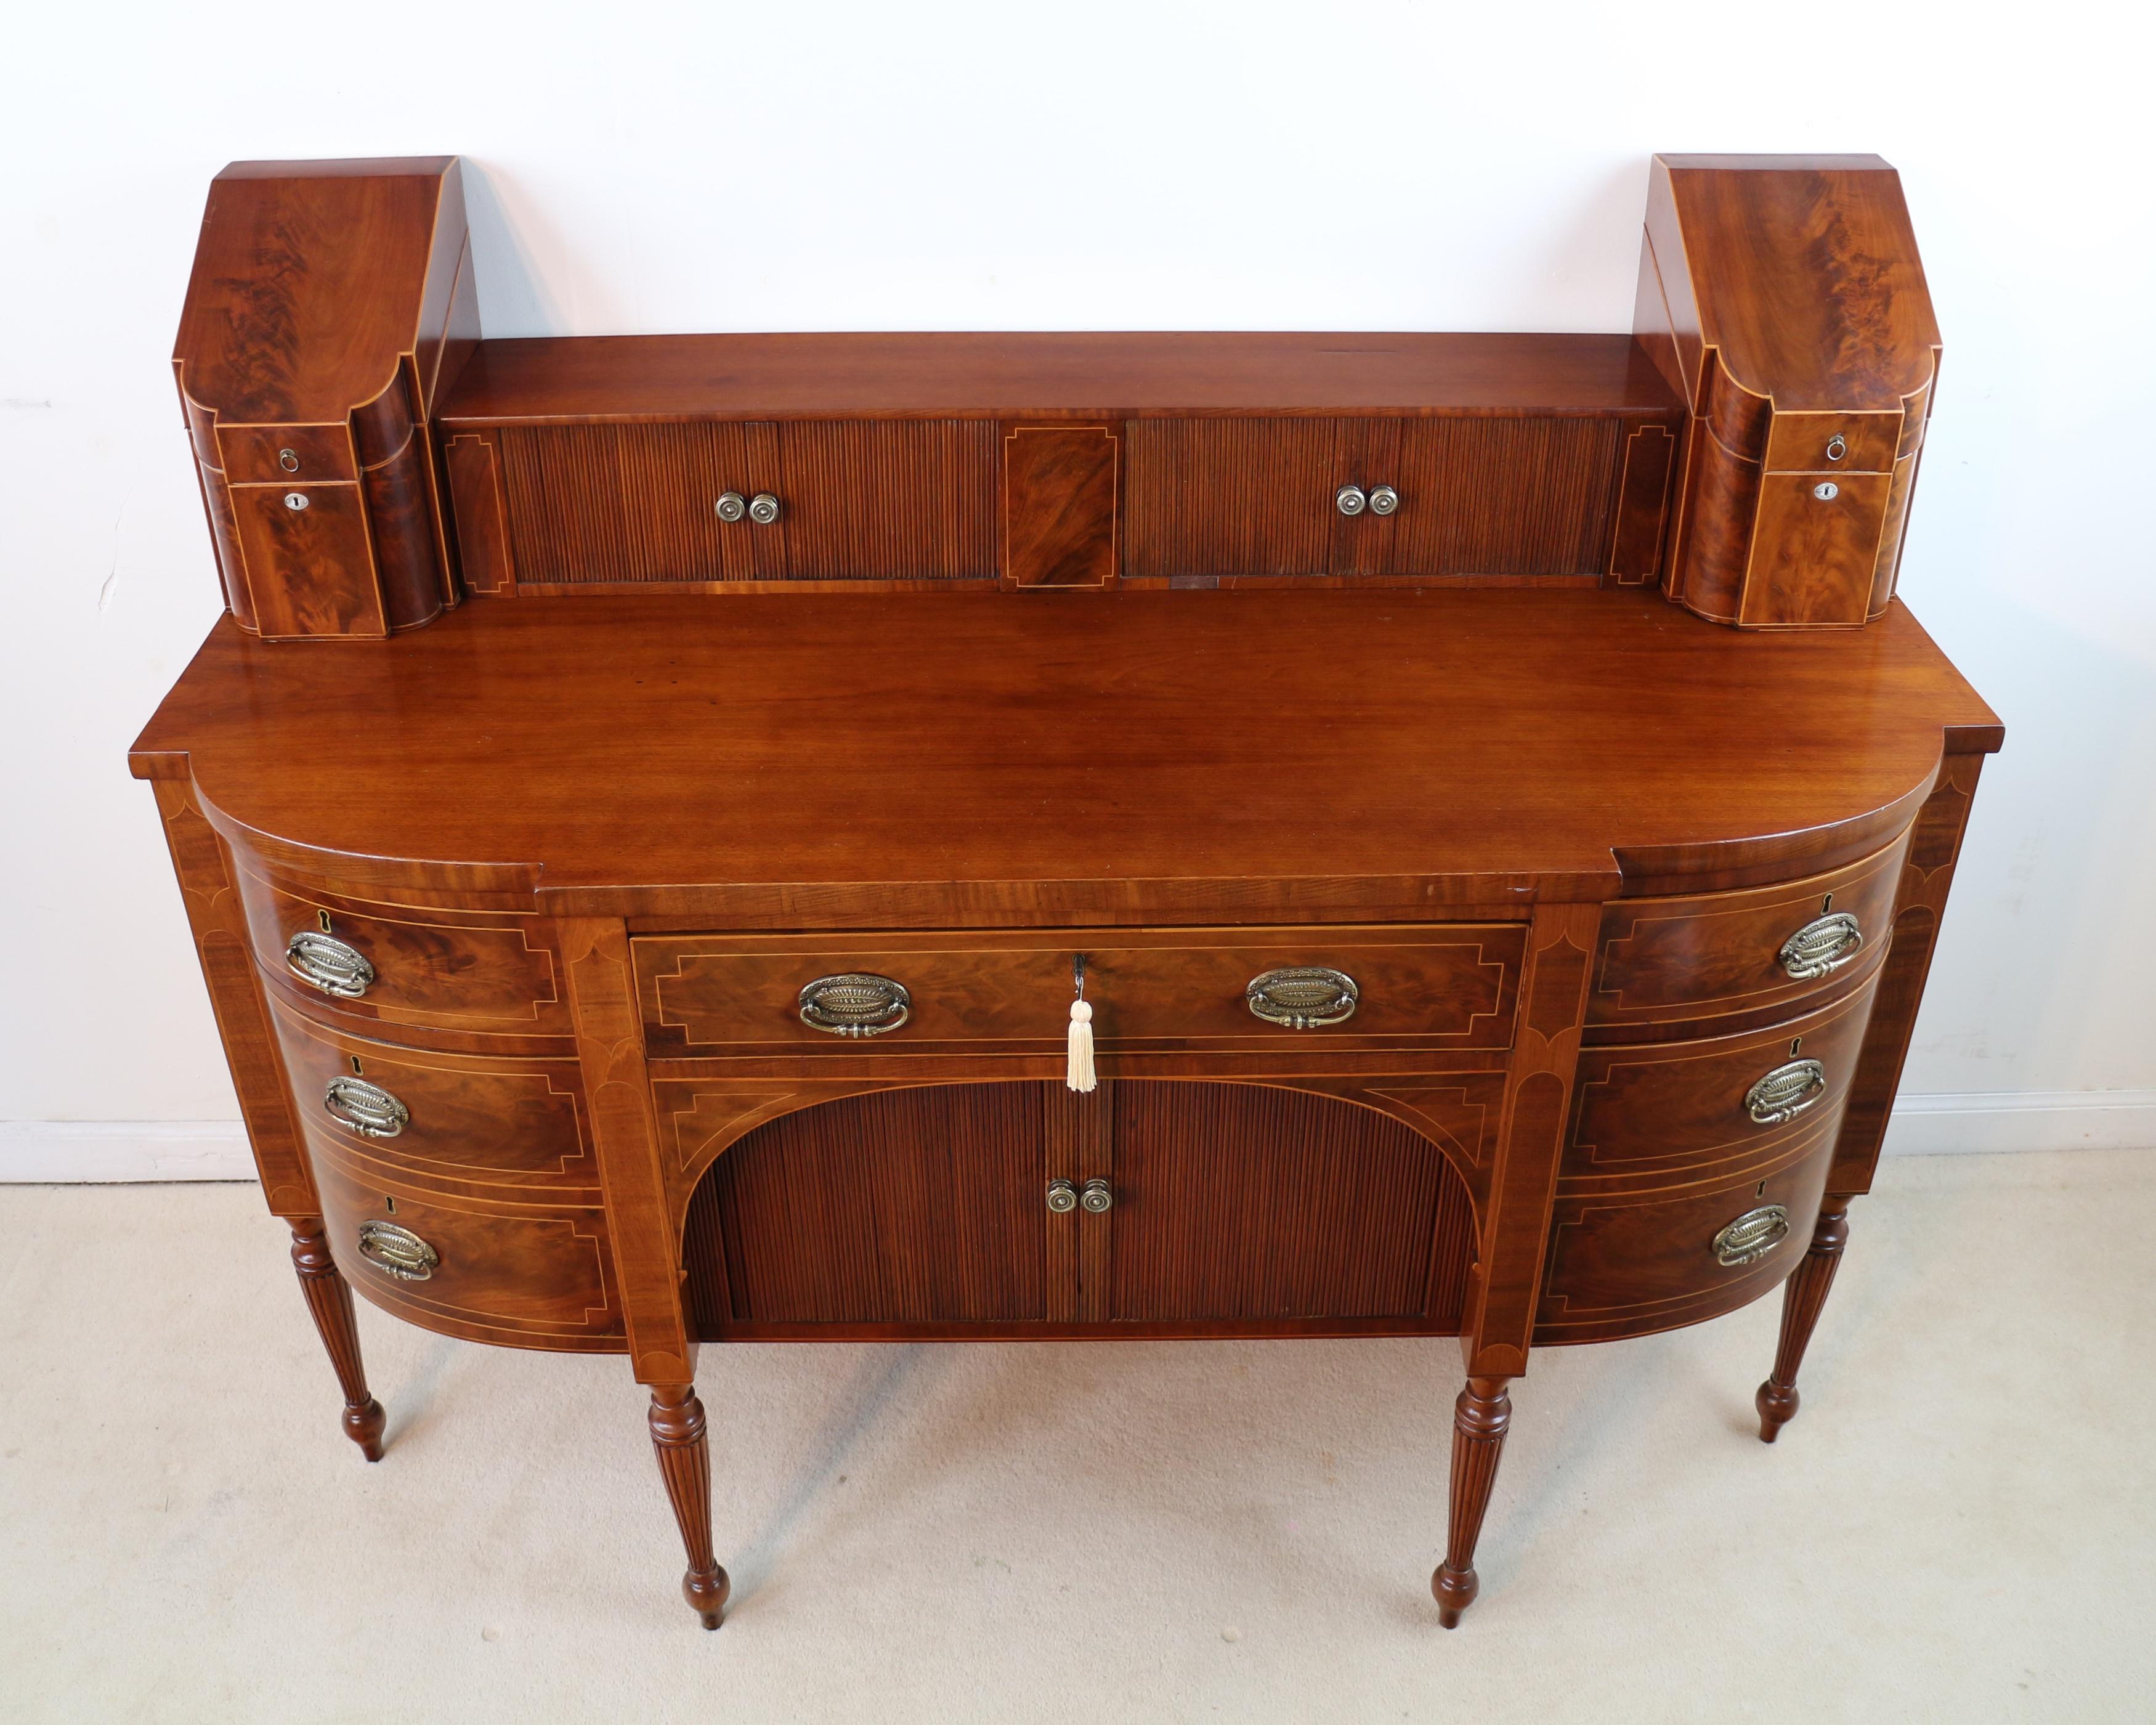 Antique George III Scottish Flame Mahogany Inlaid Stageback Cellarette Sideboard For Sale 7